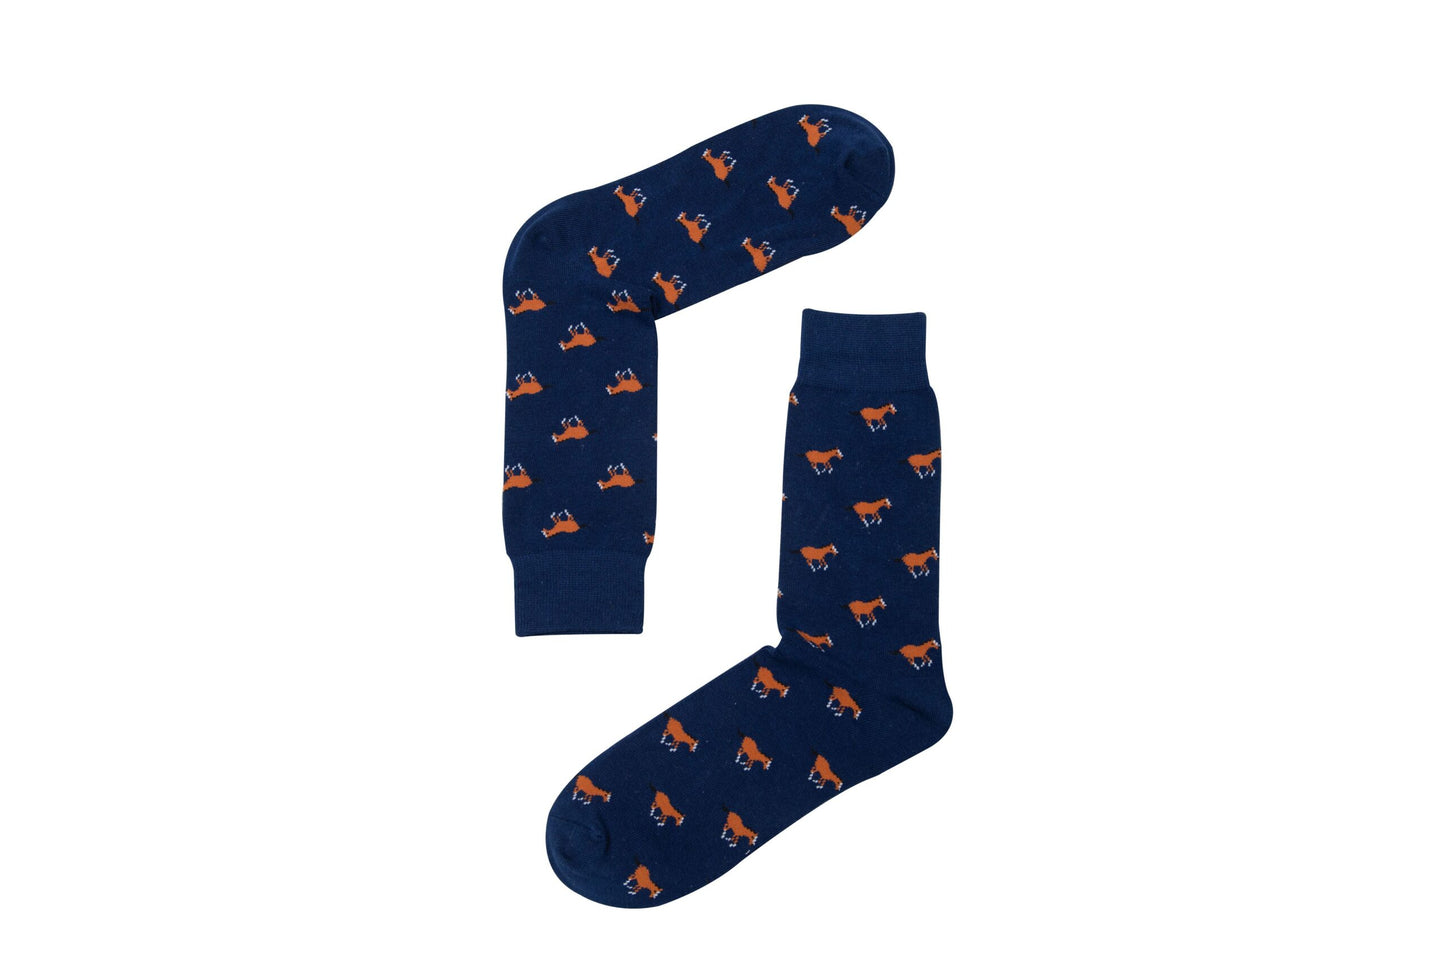 A pair of Horse Socks with orange foxes on them.